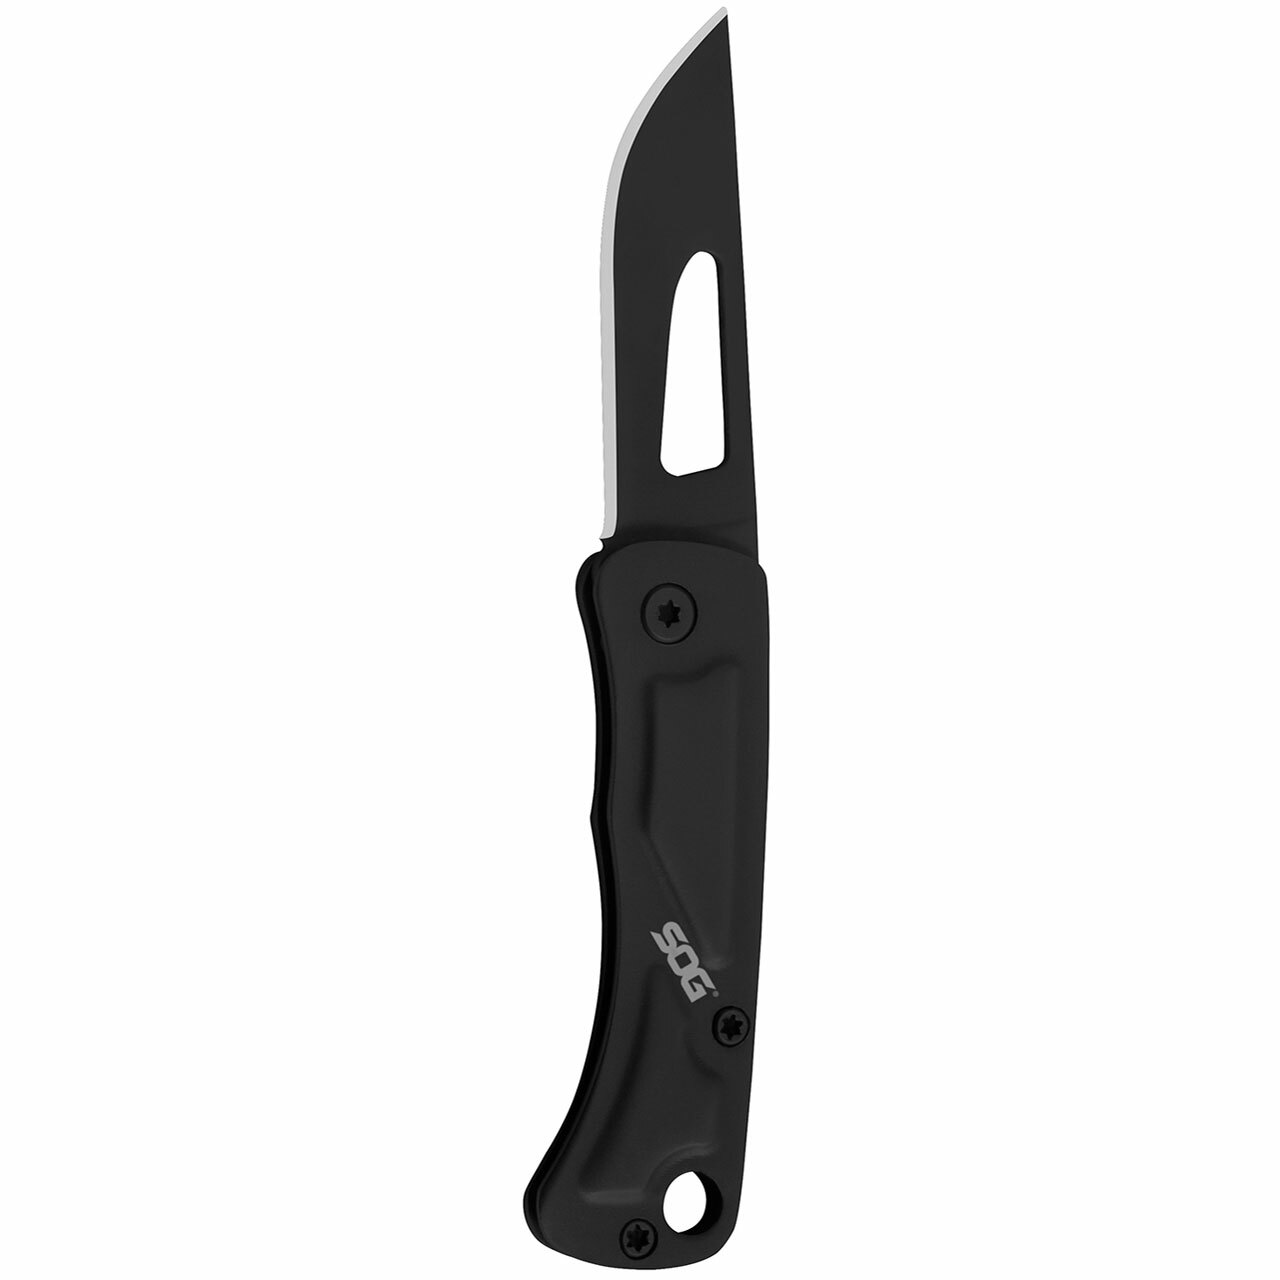  SOG Specialty Knives Countertop Knife Sharpener, one